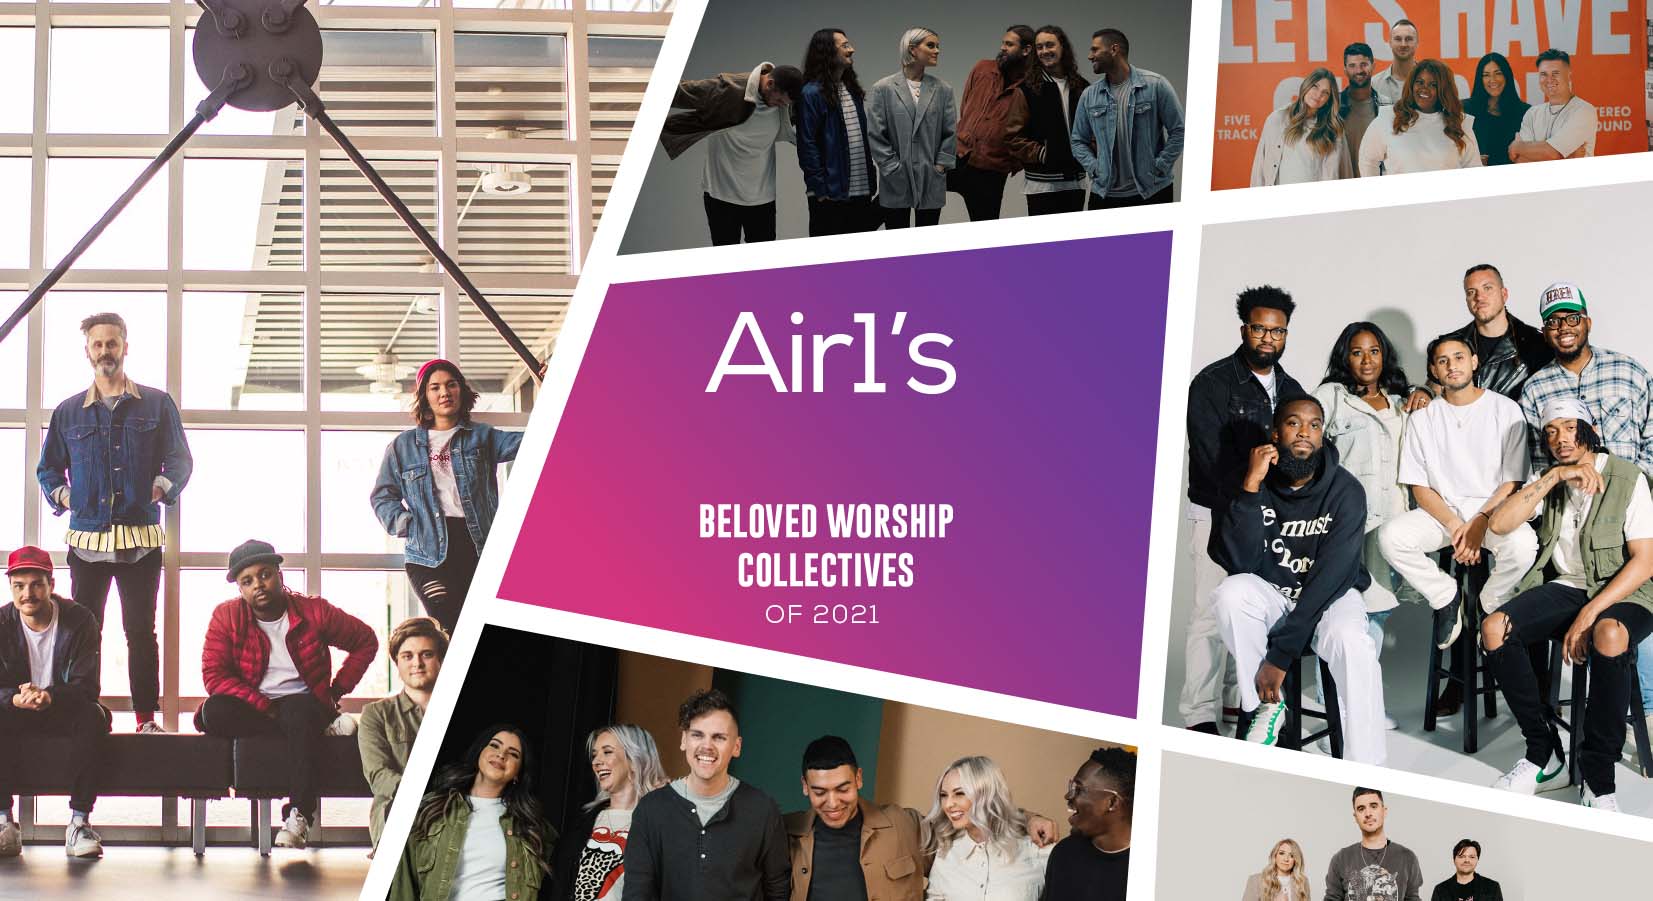 Air1's Beloved Worship Collectives of 2021